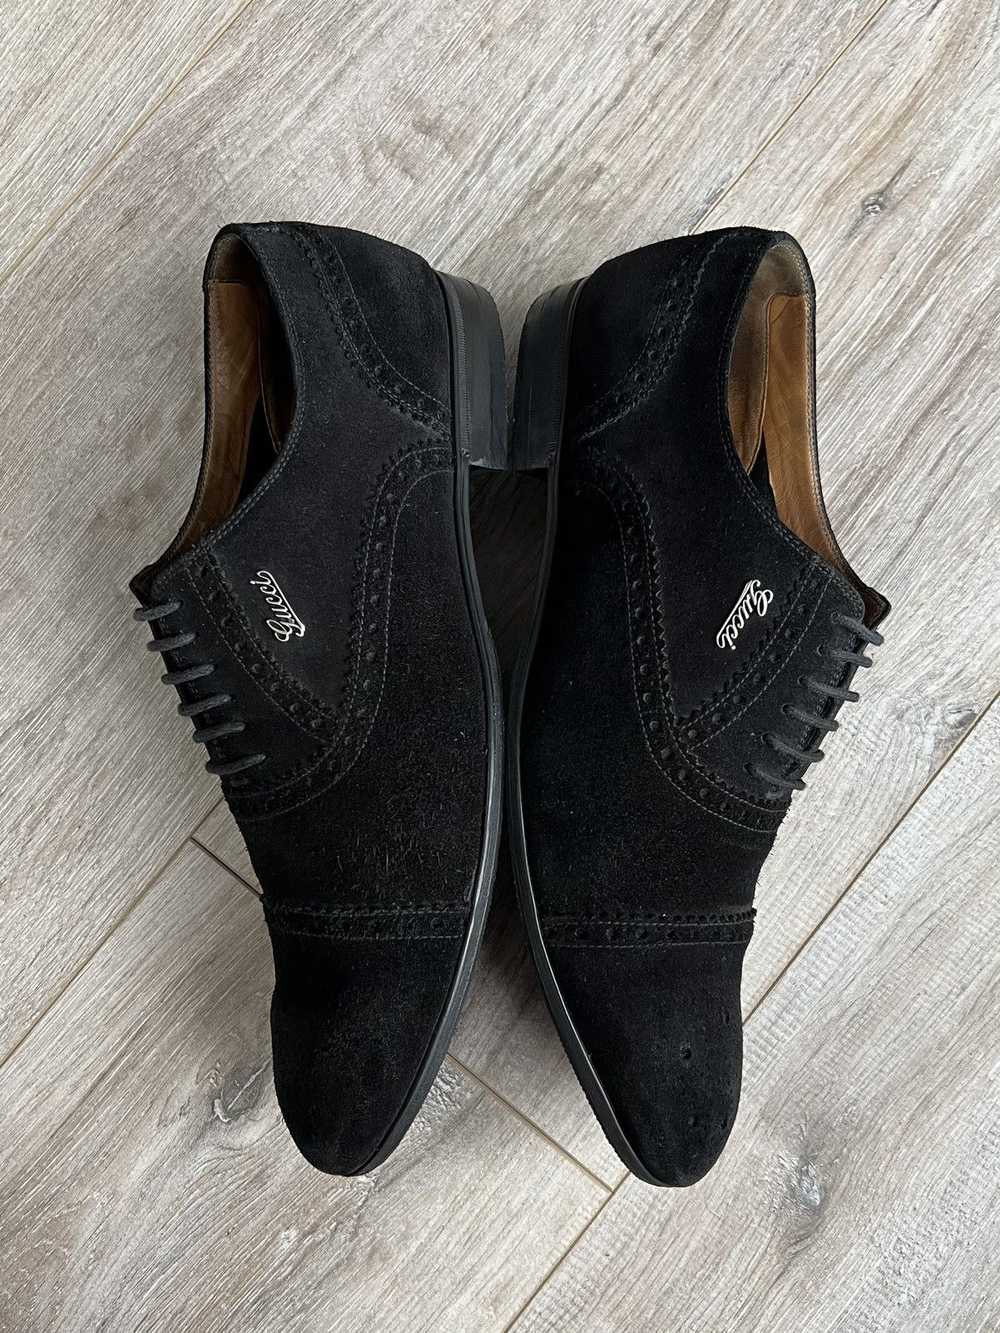 Gucci GUCCI Shoes Oxfords Brogues Suede Lace Up M… - image 11